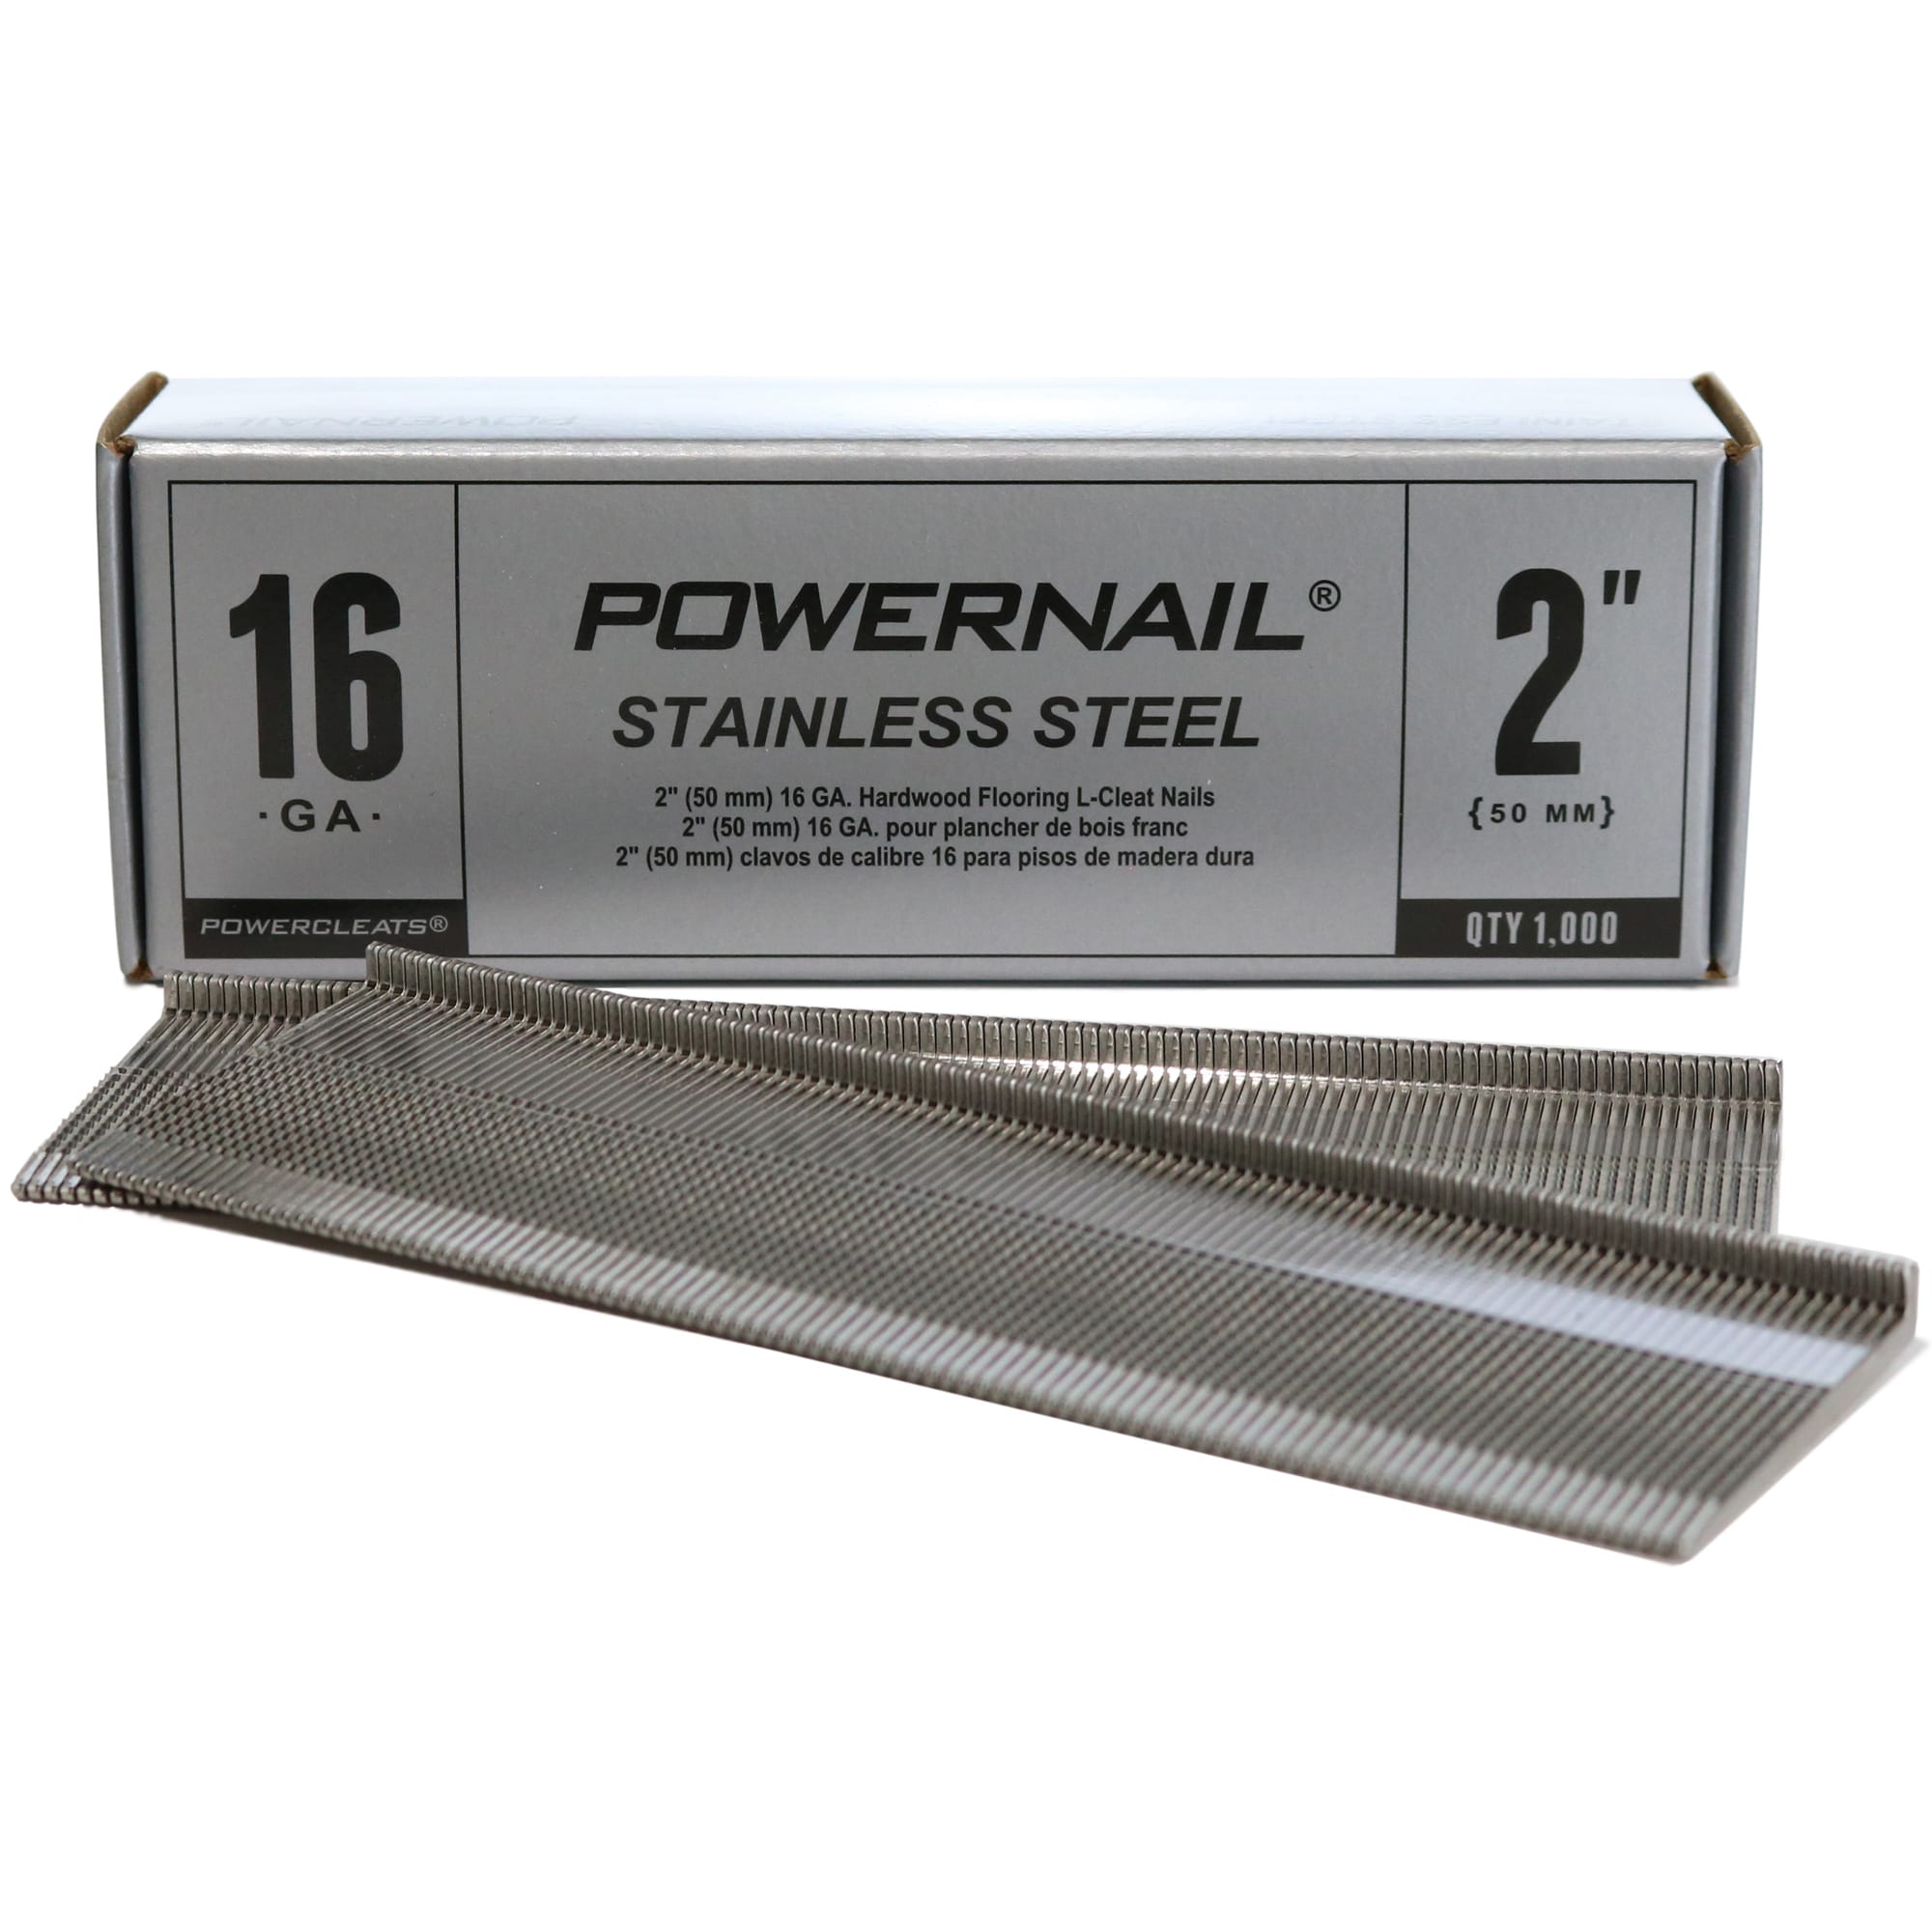 1,000ct DA25 15 Gauge 304 Stainless Steel Angled Finish Nail 34 Degree 2 1/2" 